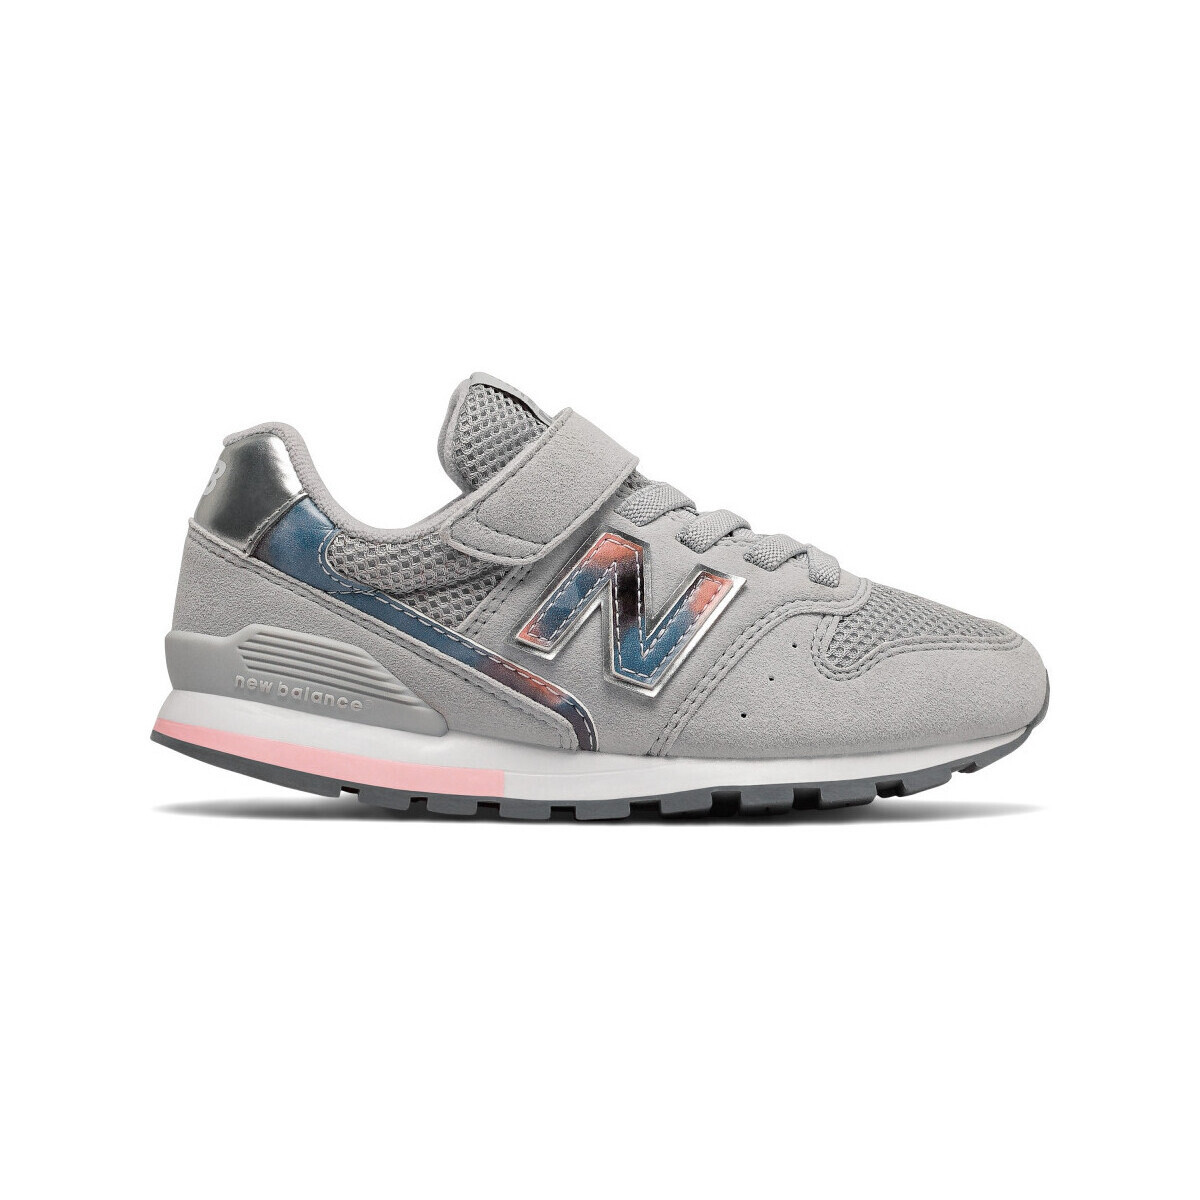 Chaussures Enfant Baskets mode New Balance Yv996 m Gris